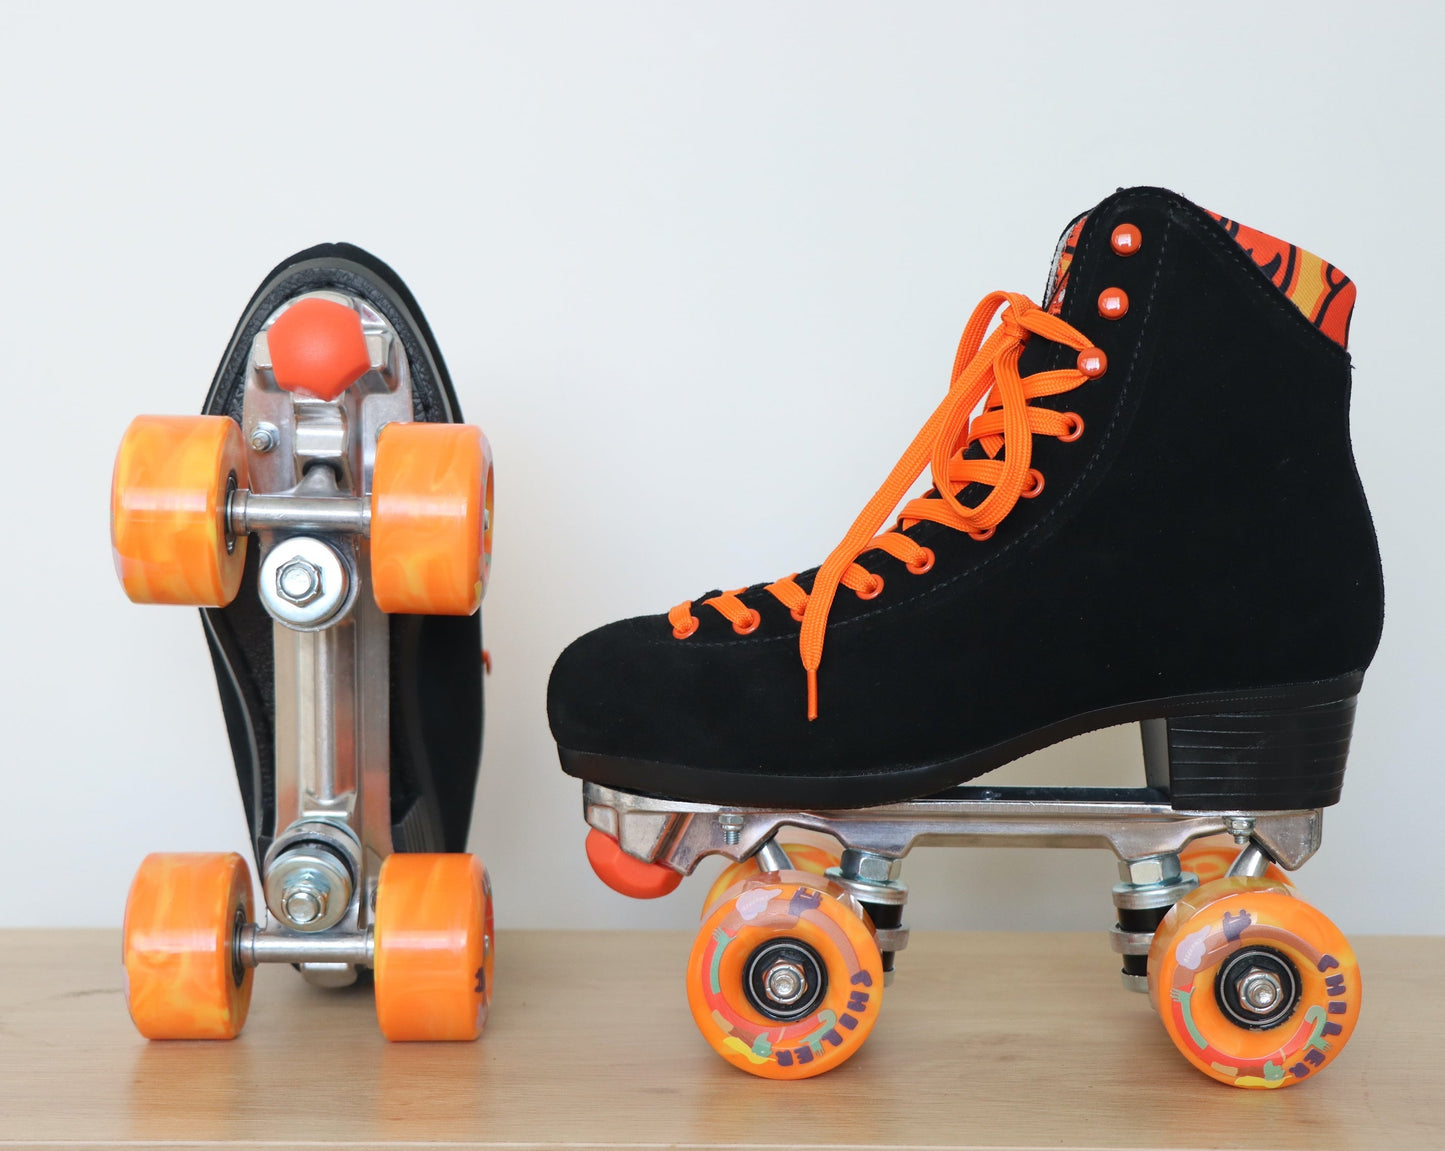 Chuffed Skates black roller skates with toe jam plugs and chiller wheels